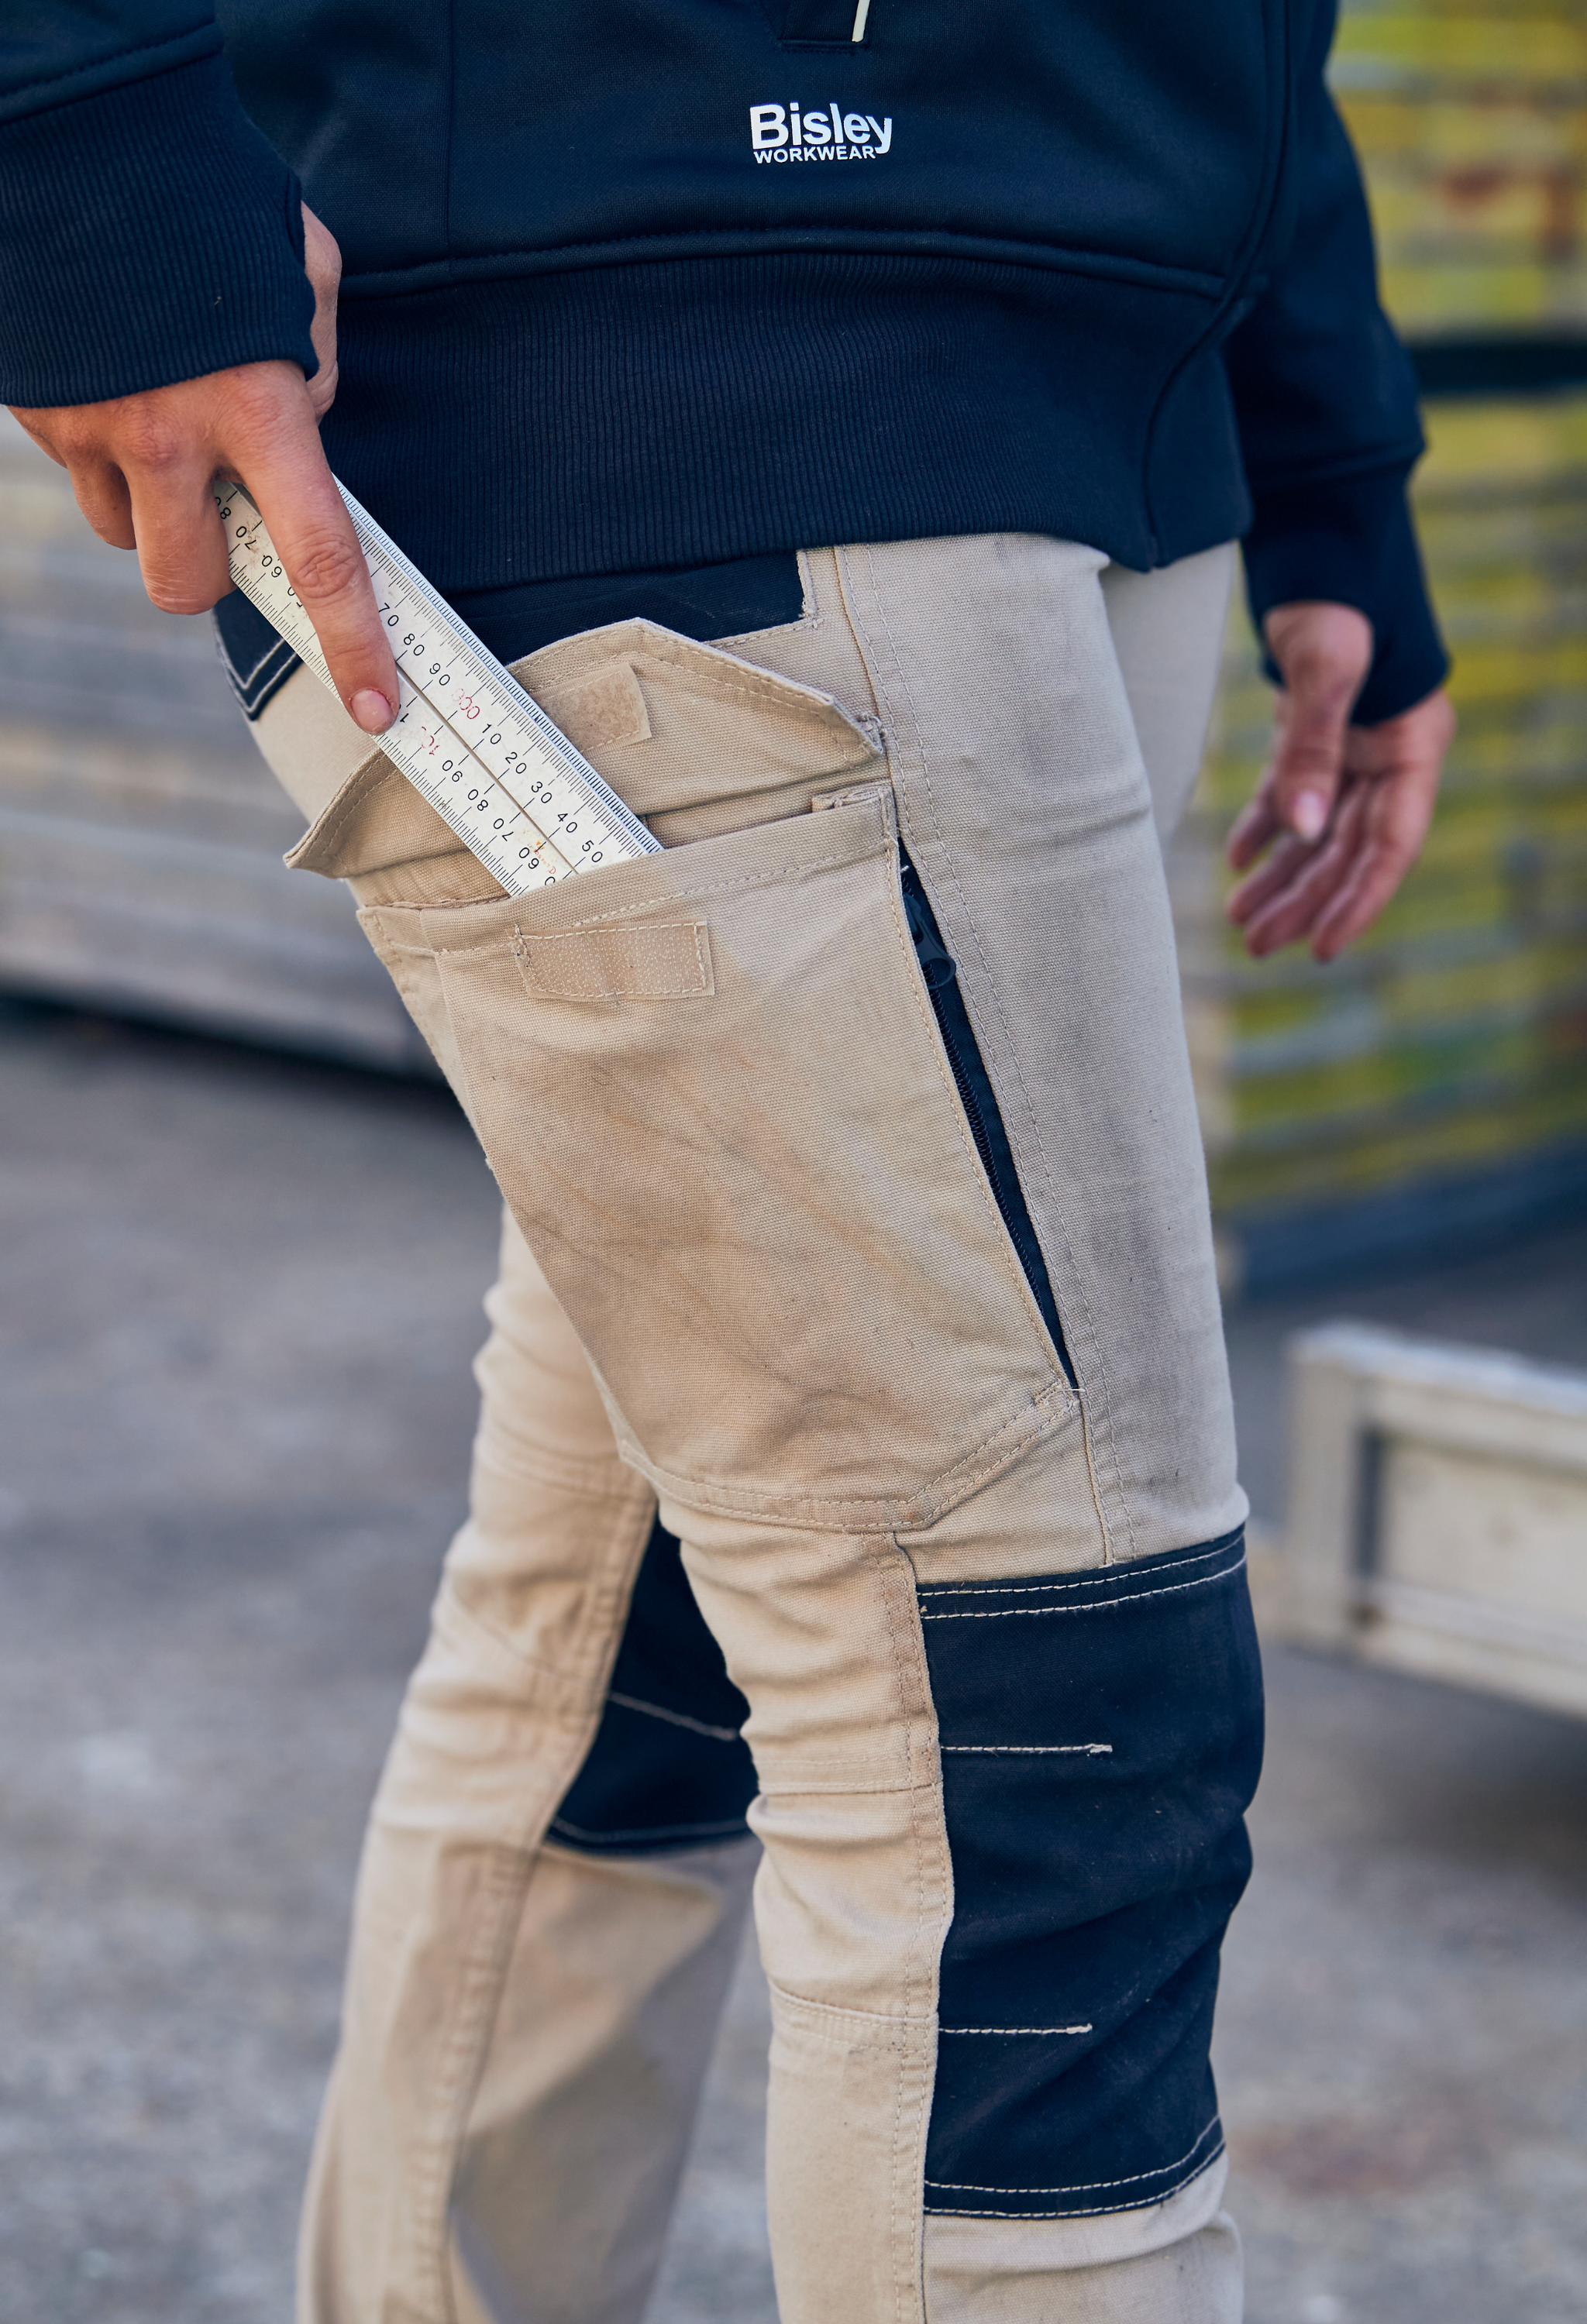 Dickies Everyday Flex Trousers  Workwear from Merlin Direct Supplies Ltd UK